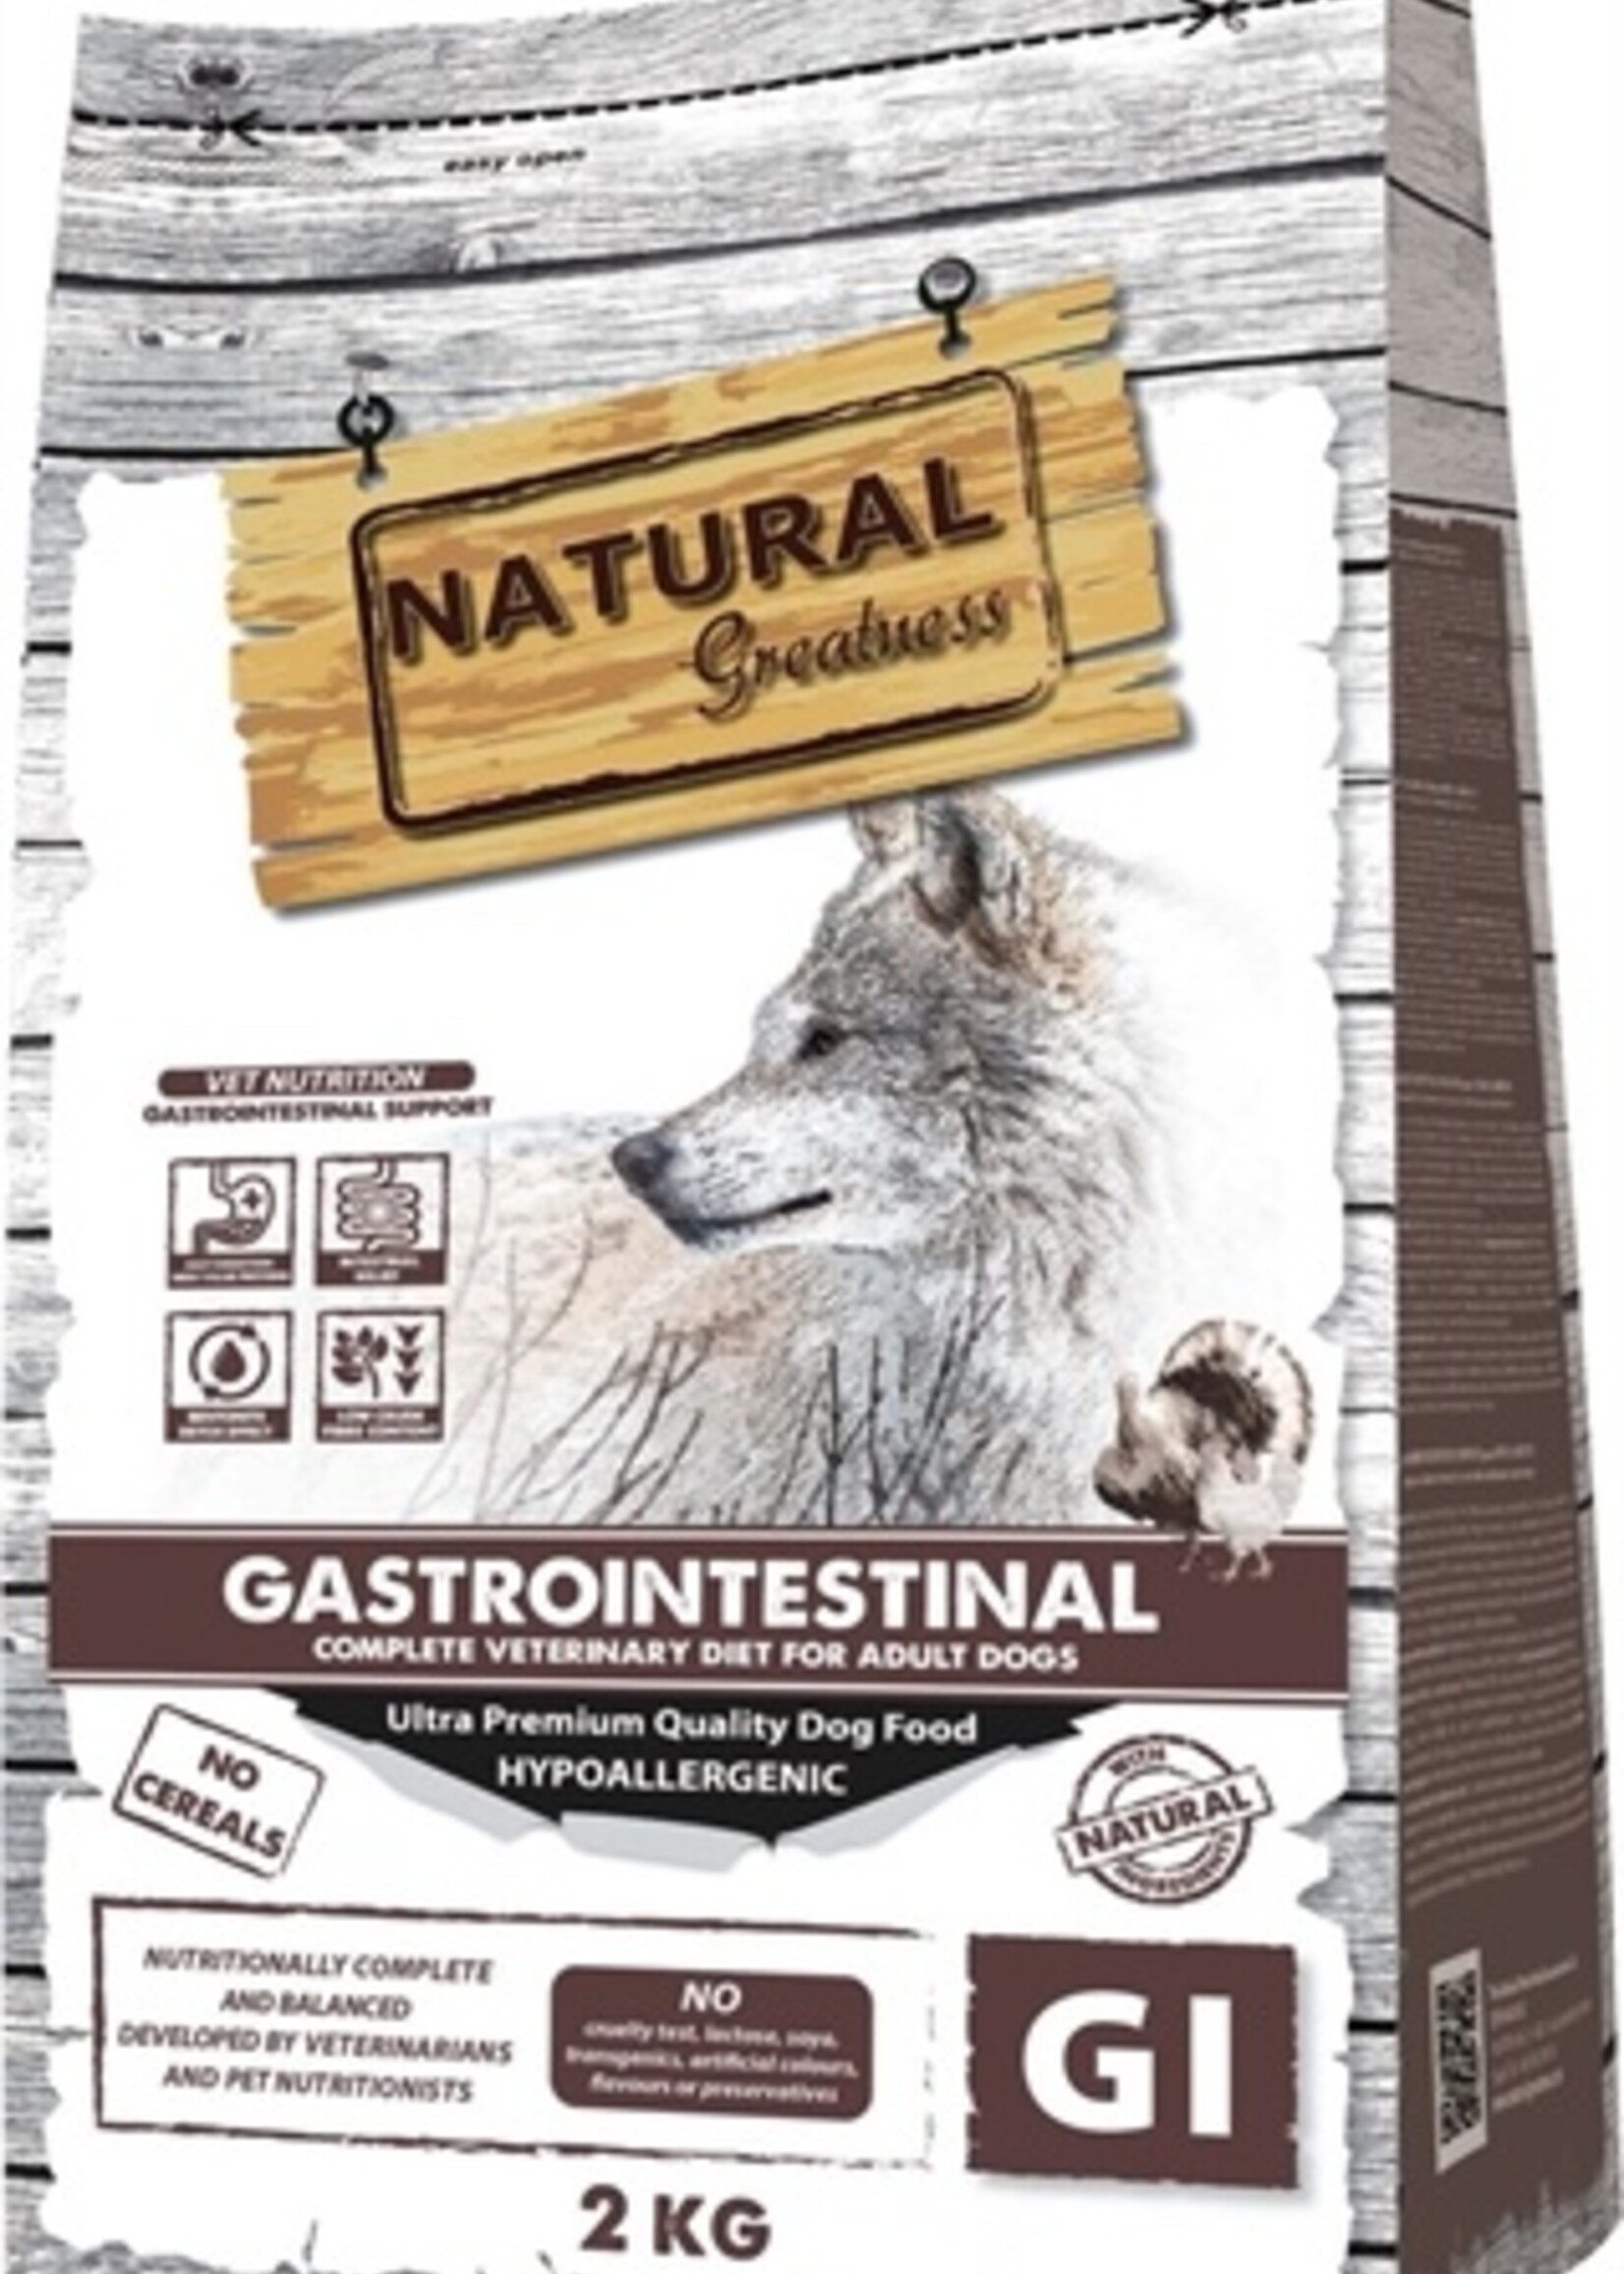 Natural greatness Natural greatness veterinary diet dog gastrointestinal complete